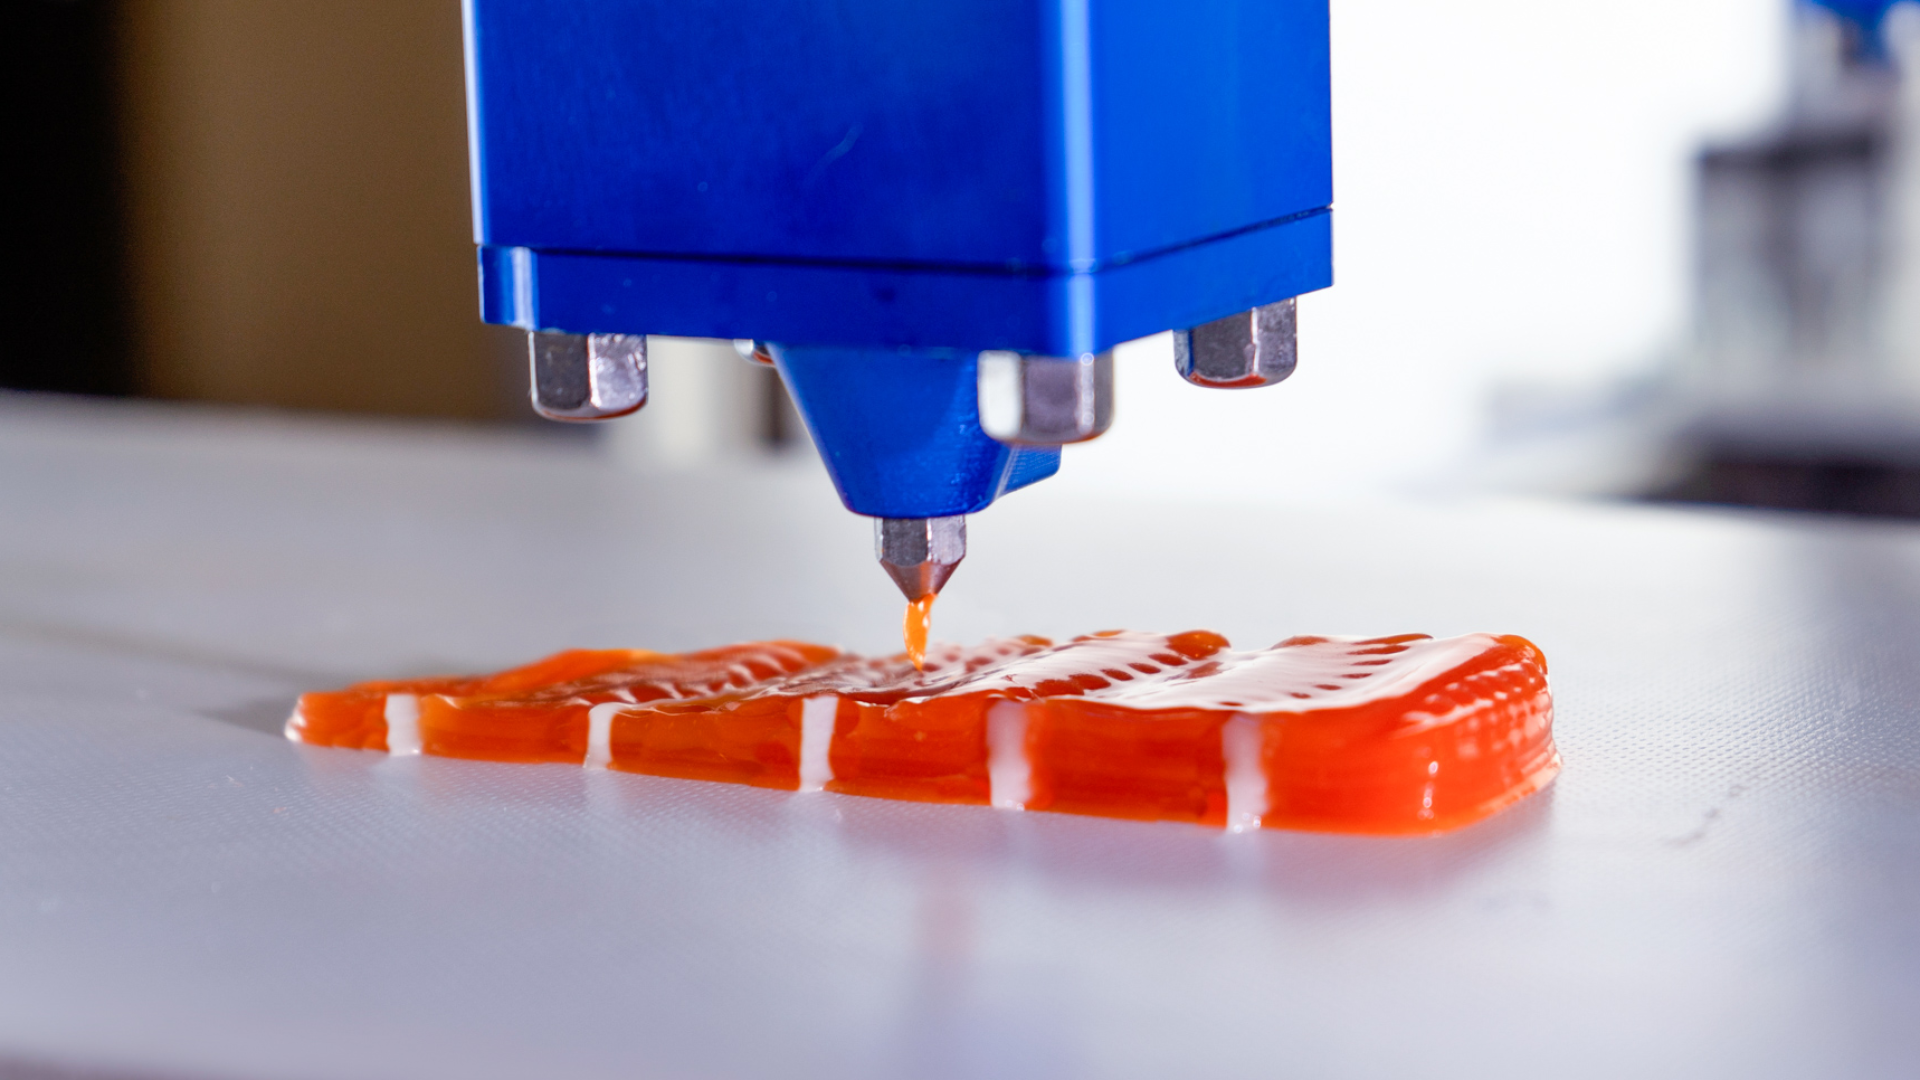 Mycorena and Revo Foods Develop 3D Printable Mycoprotein for Vegan Seafood Alternatives